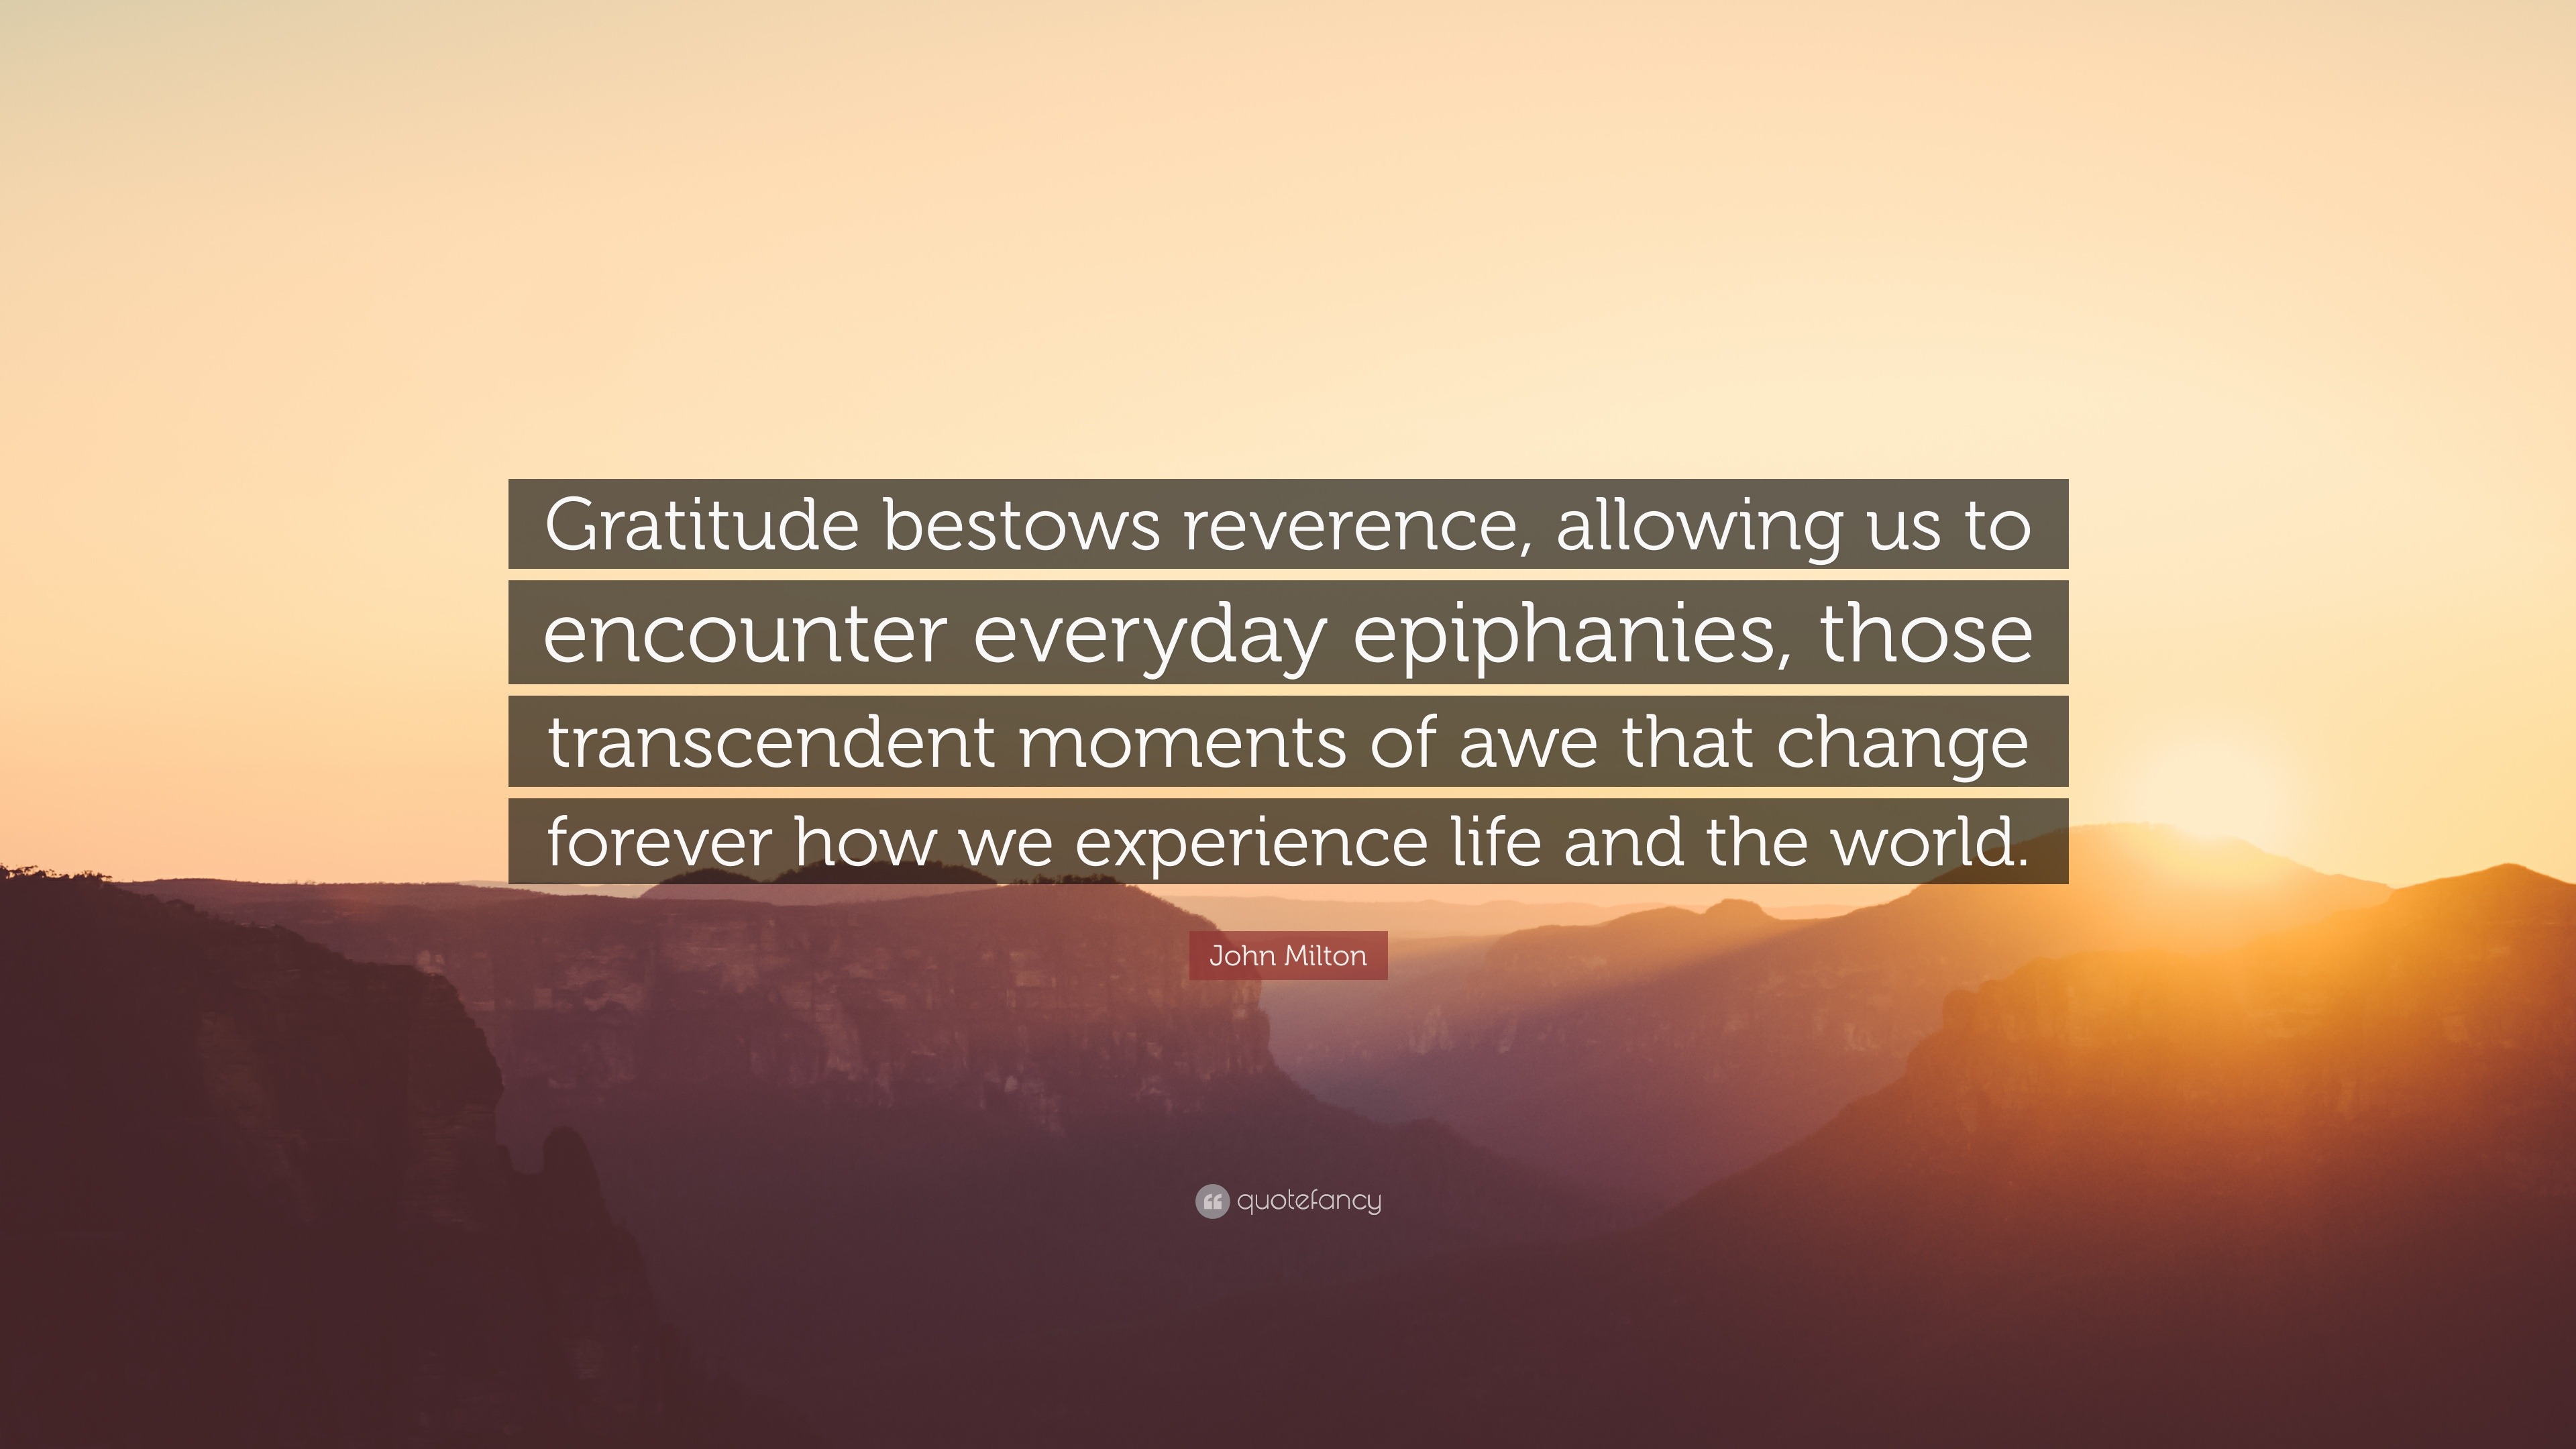 John Milton Quote “Gratitude bestows reverence allowing us to encounter everyday epiphanies